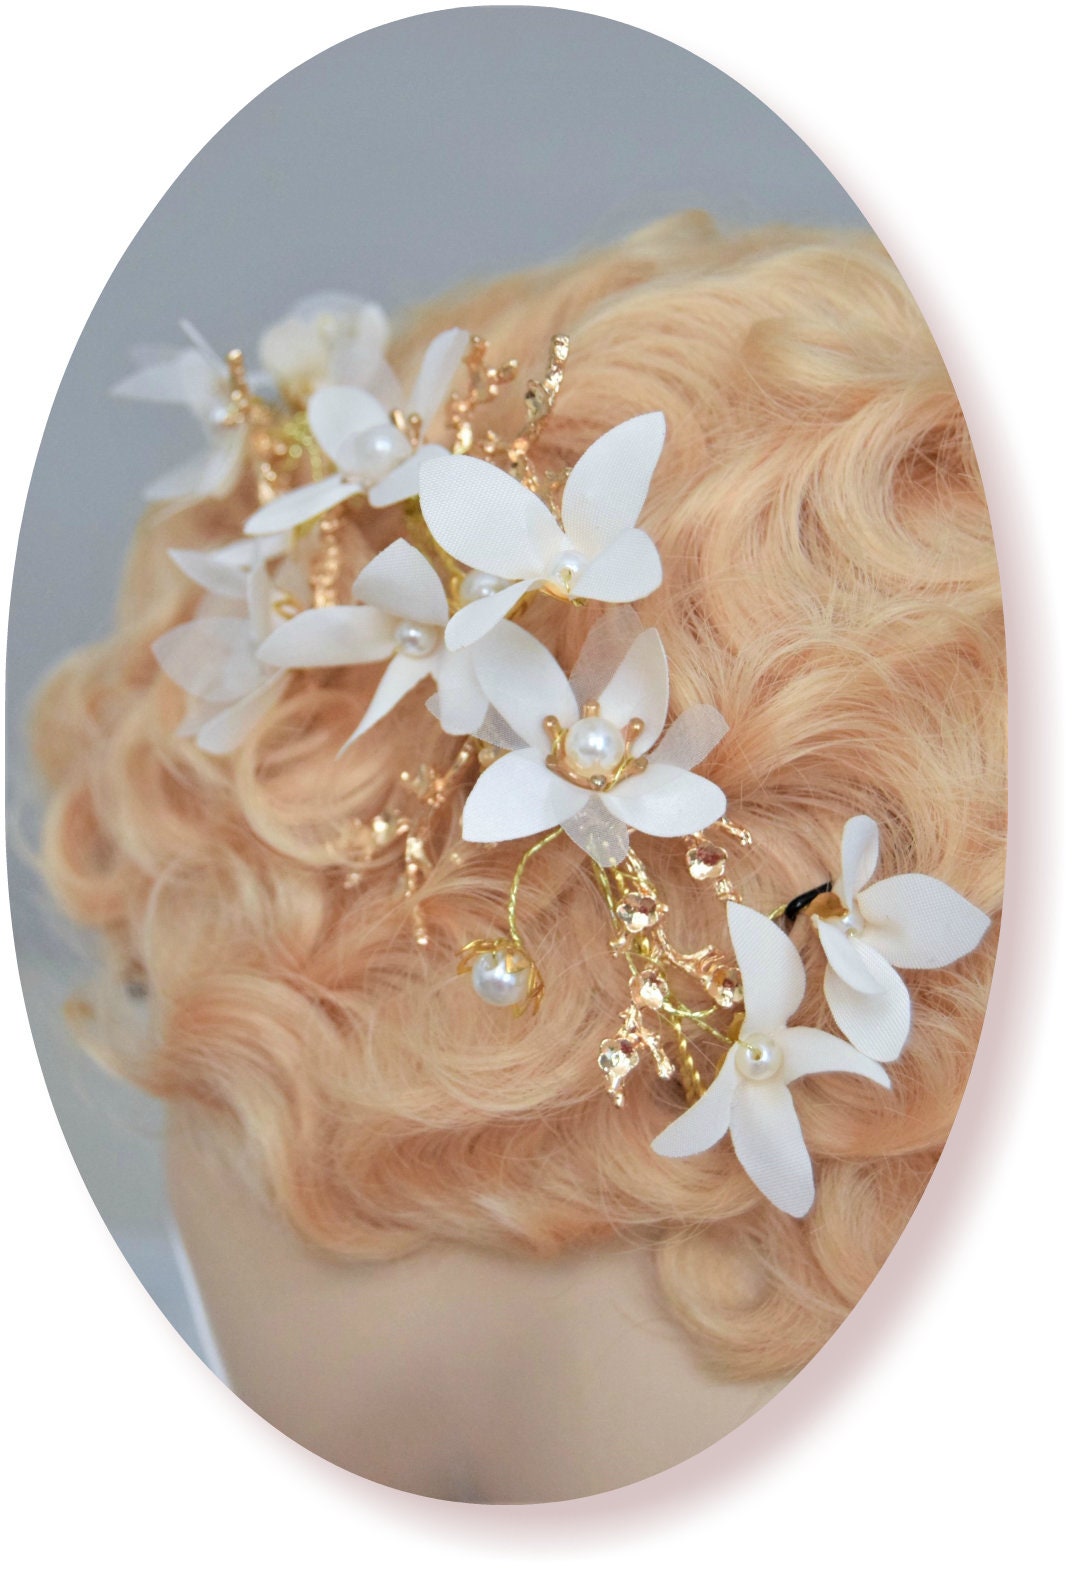 Beautiful 1920s 1930s romantic headband ethereal bridal white with gold magnolia floral pin hand made headpiece